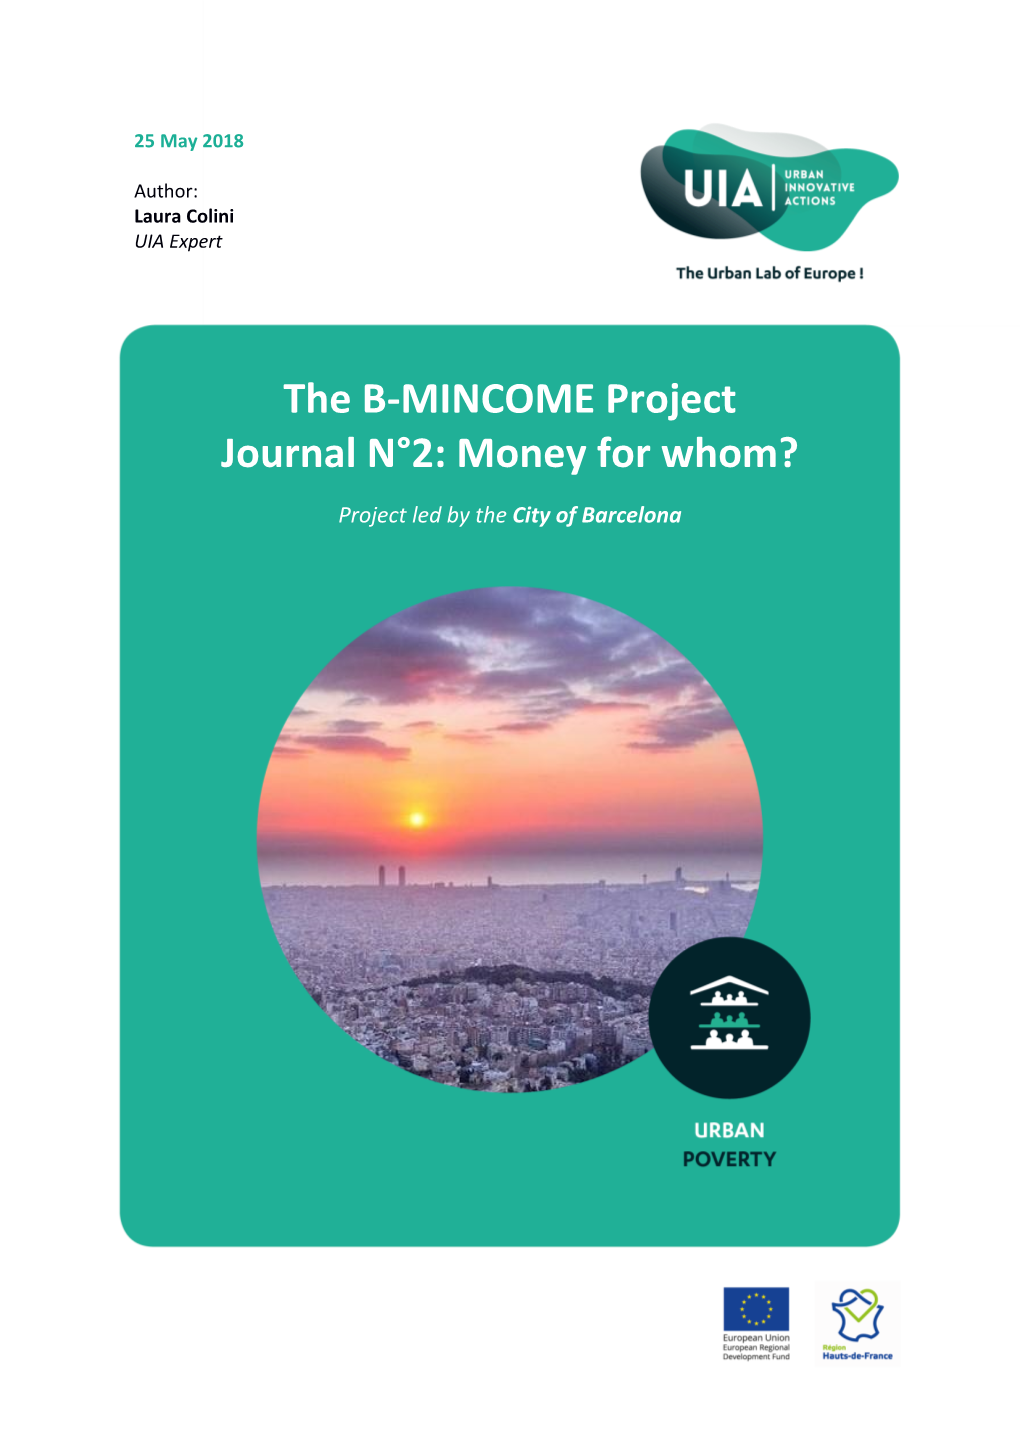 The B-MINCOME Project Journal N°2: Money for Whom?